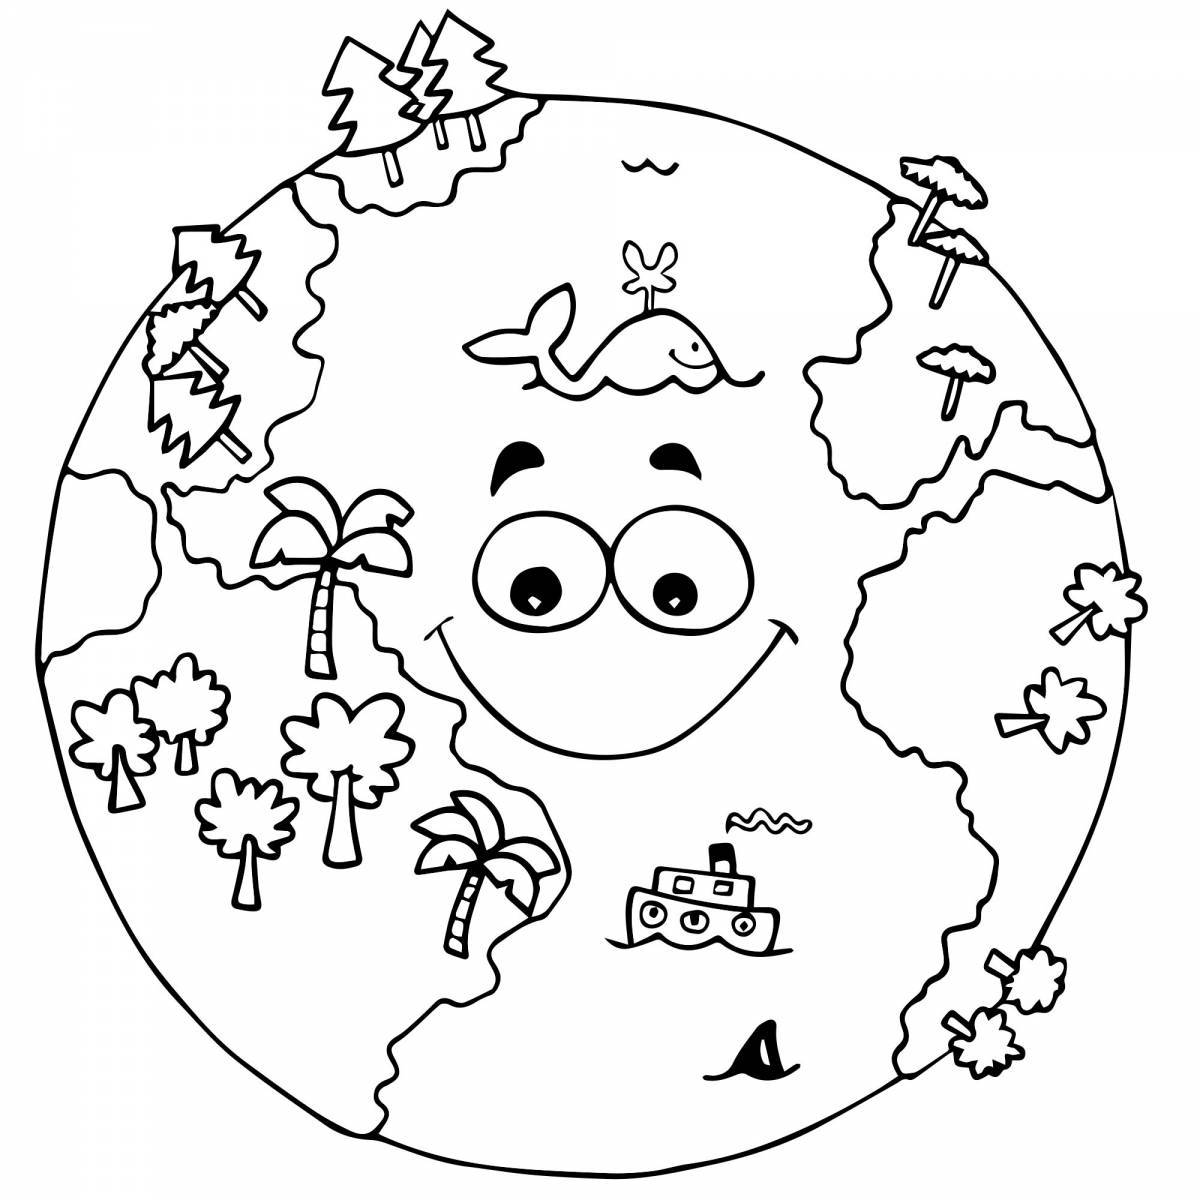 Earth planet for kids #3